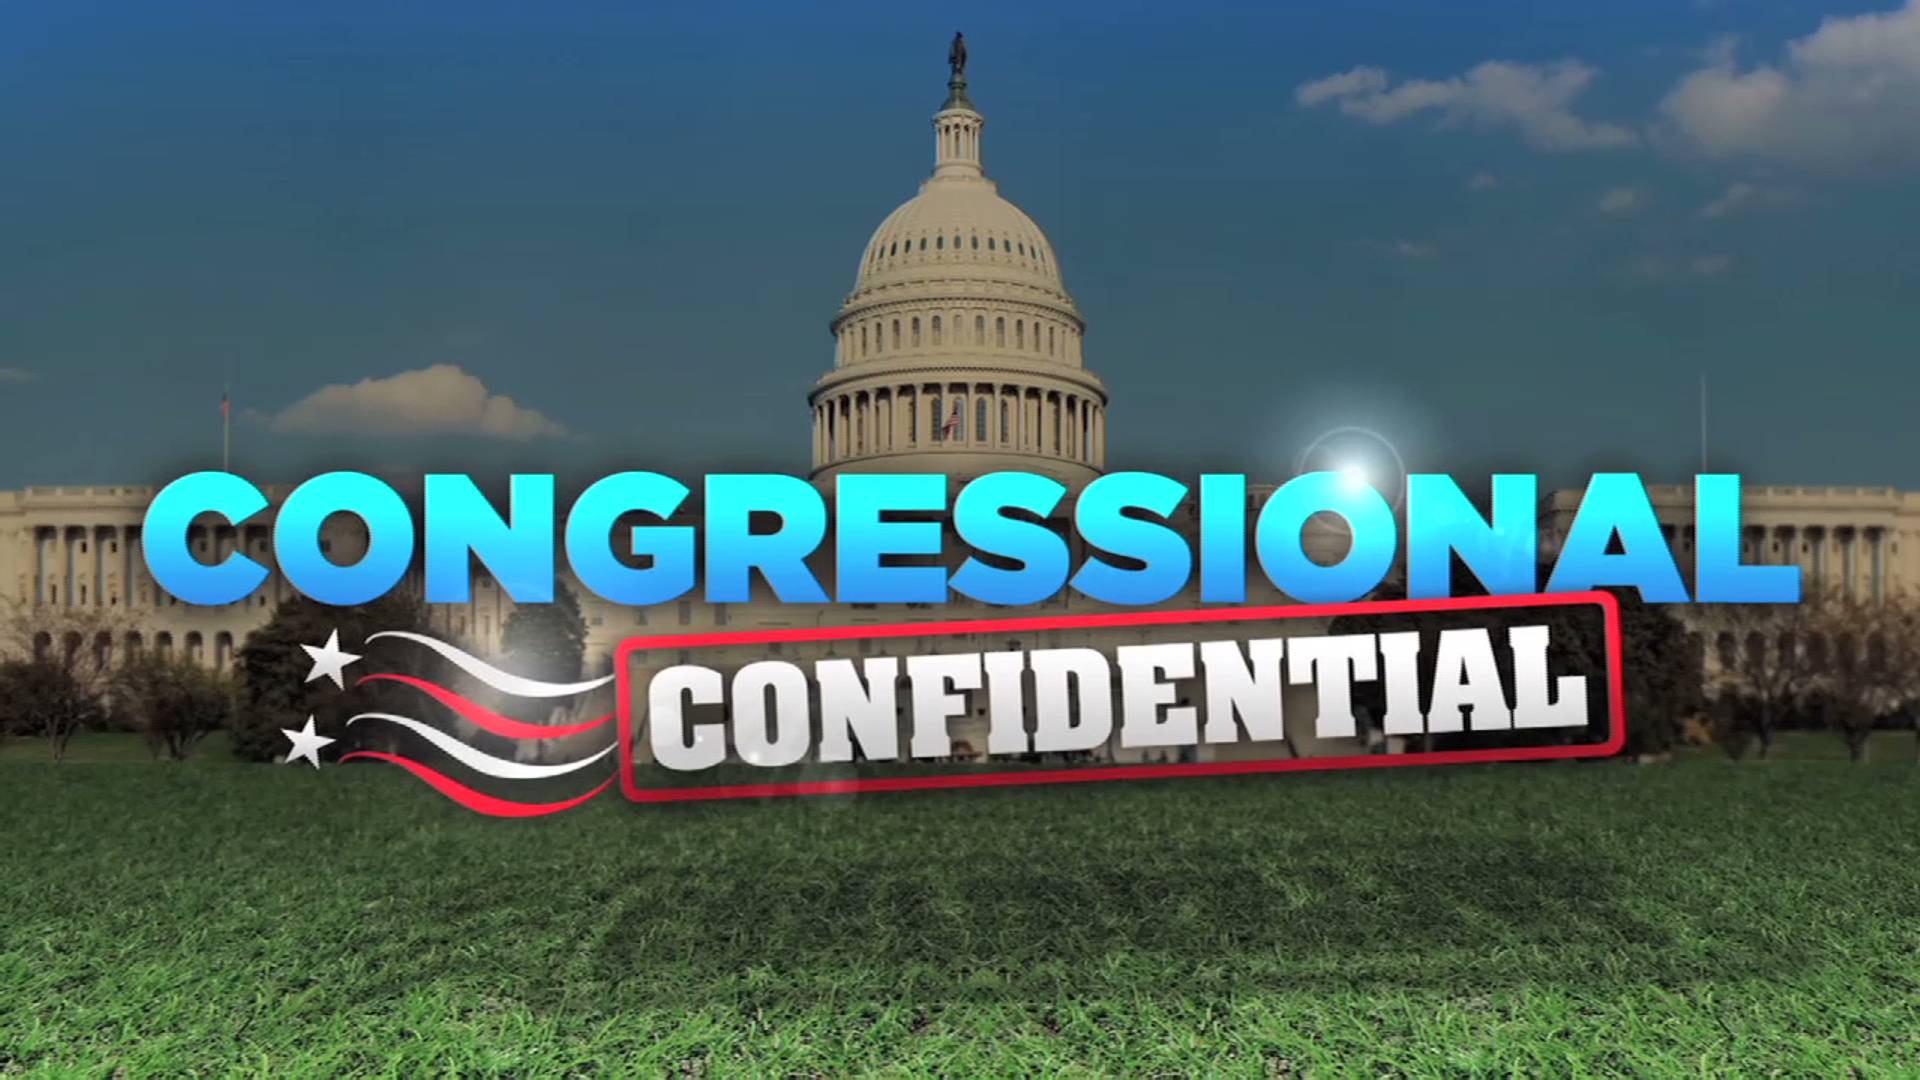 What is the Congressional Confidential?